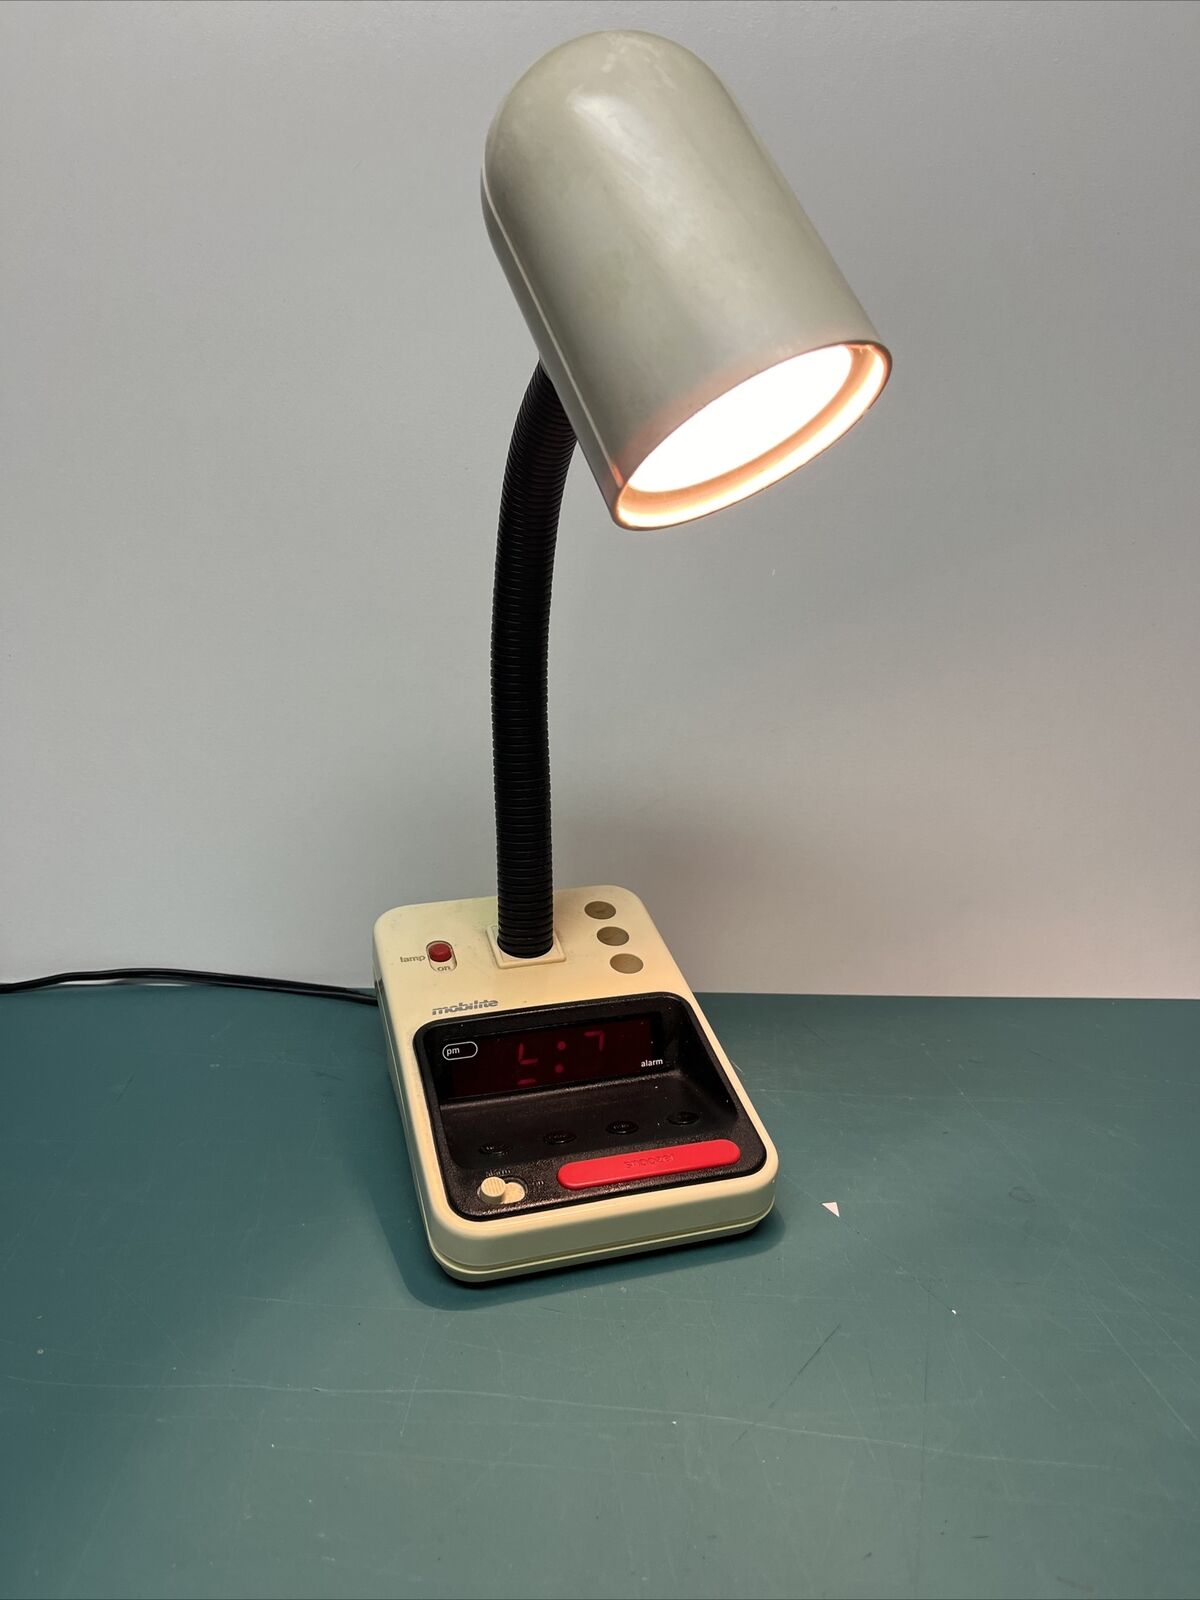 Vintage Mobilite Desk Lamp with Clock and Alarm Model M9845 Tested and Working